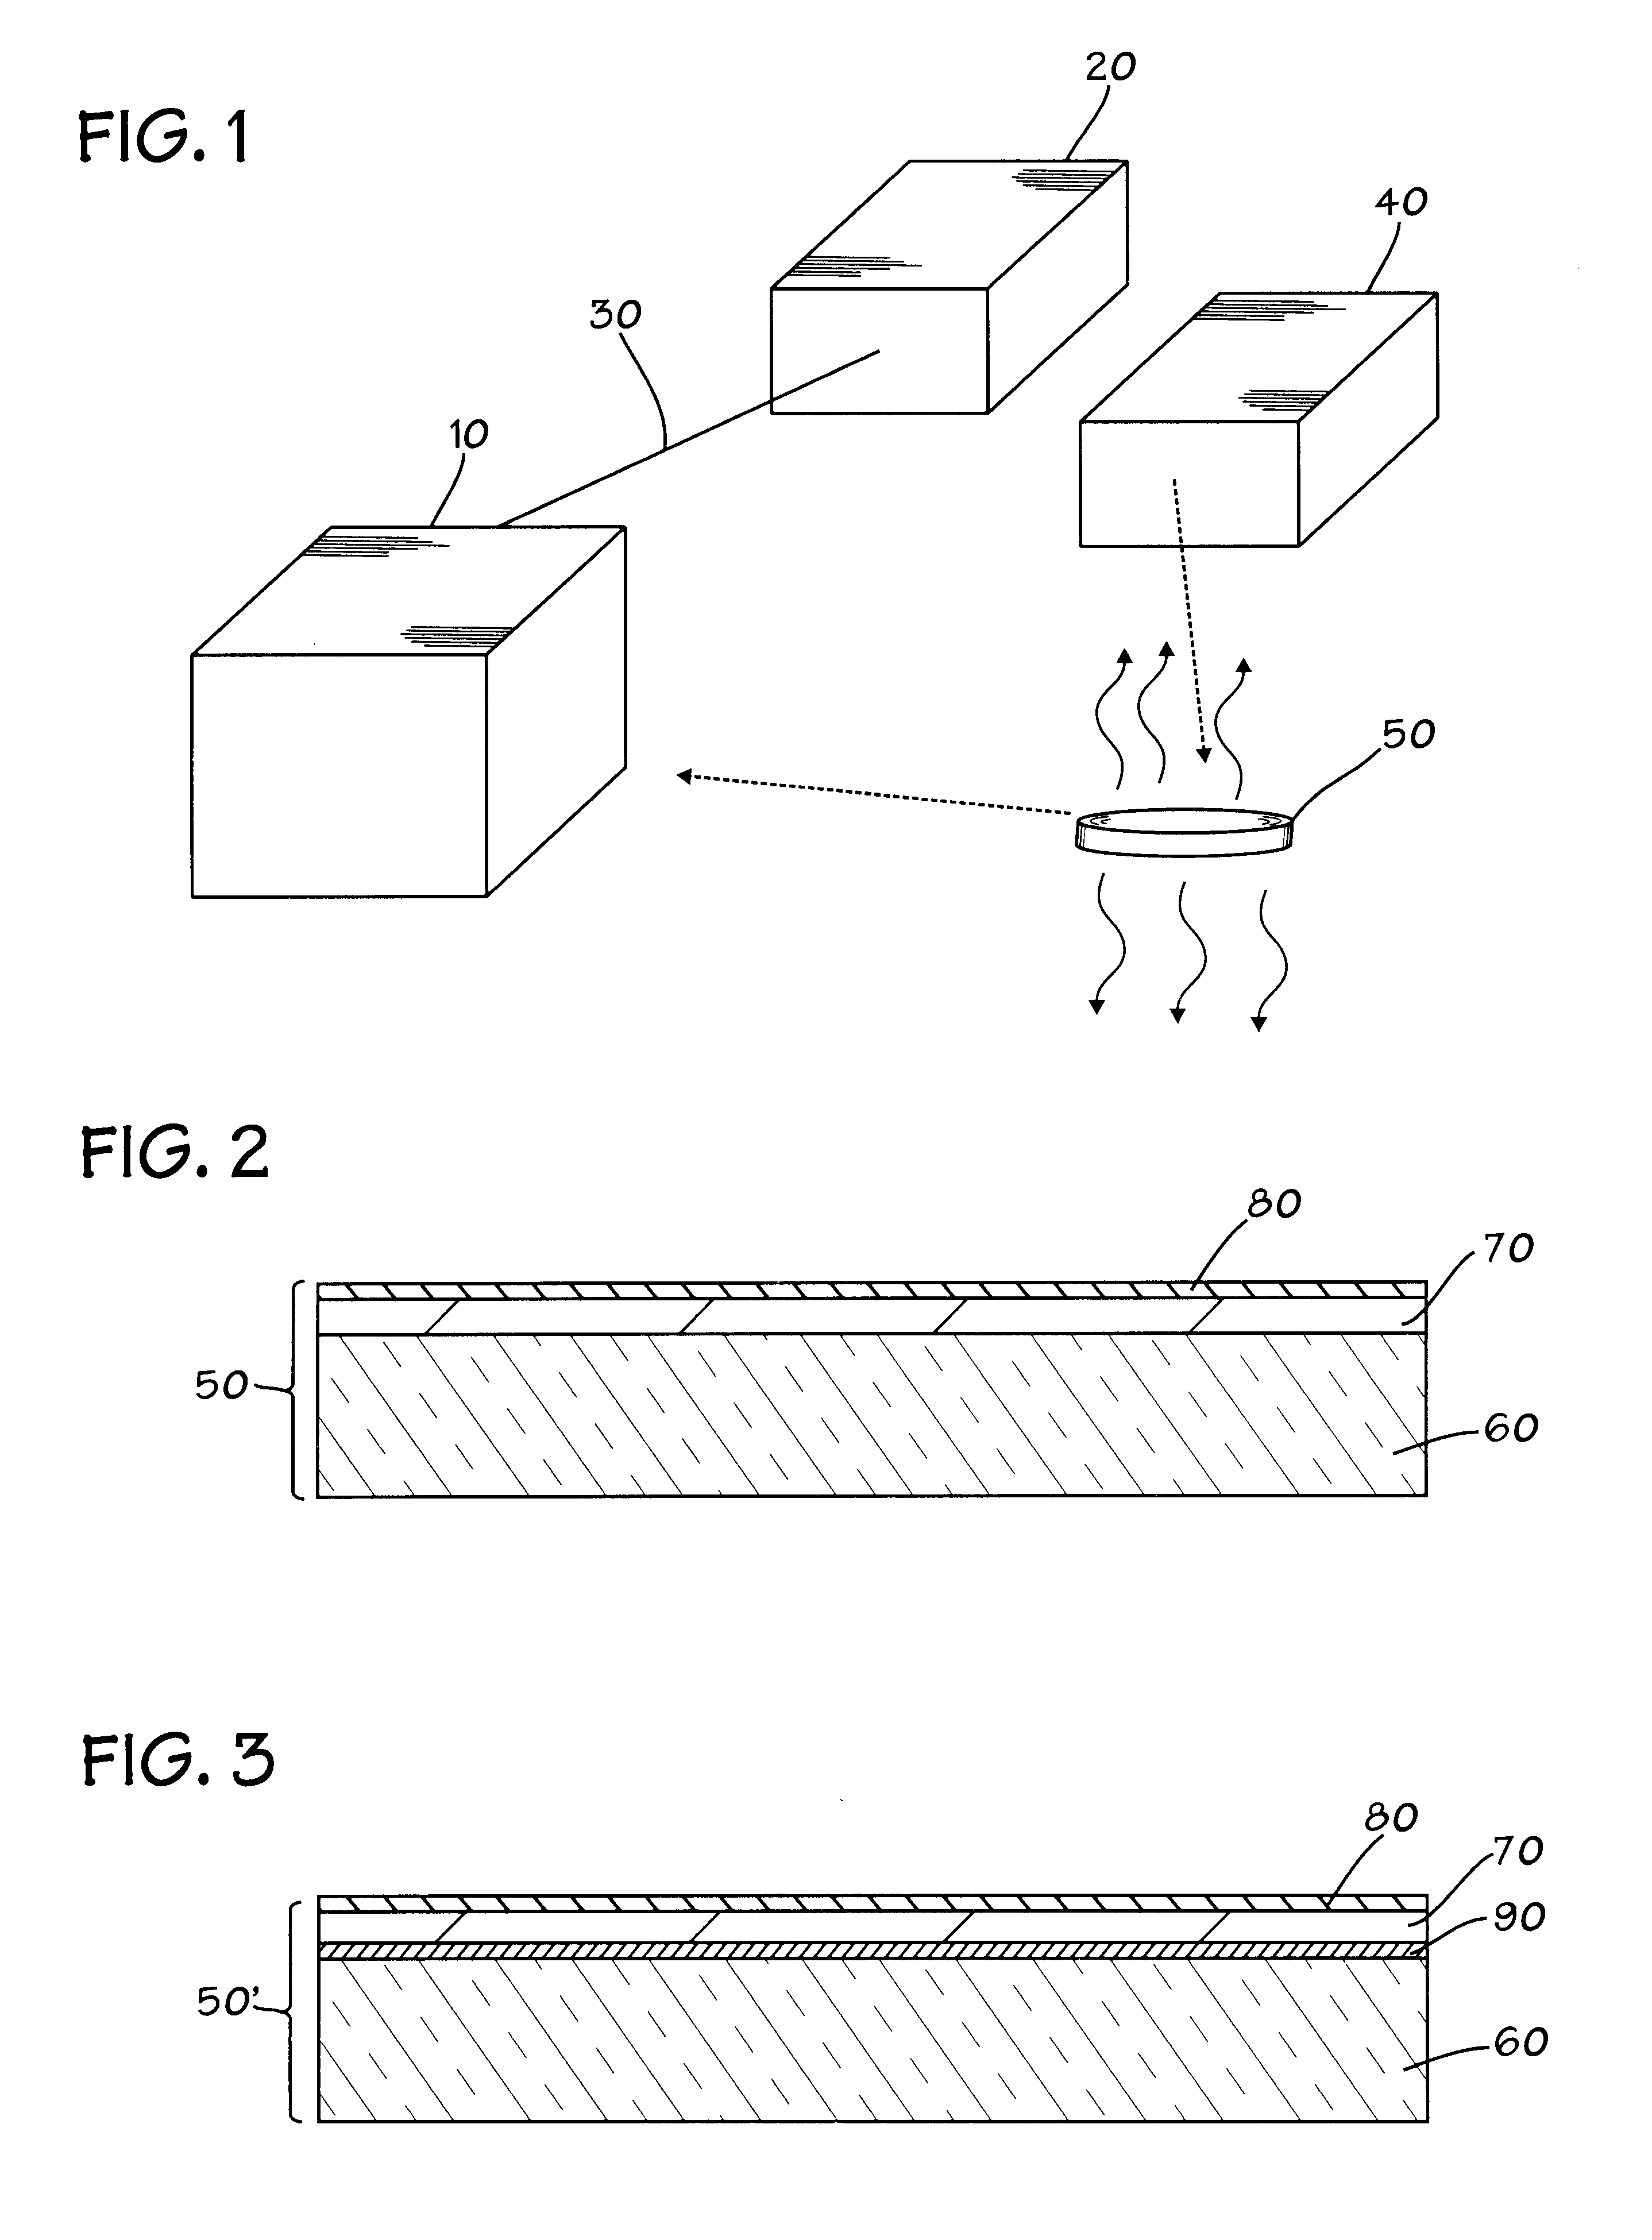 Method of improving vacuum quality in semiconductor processing chambers